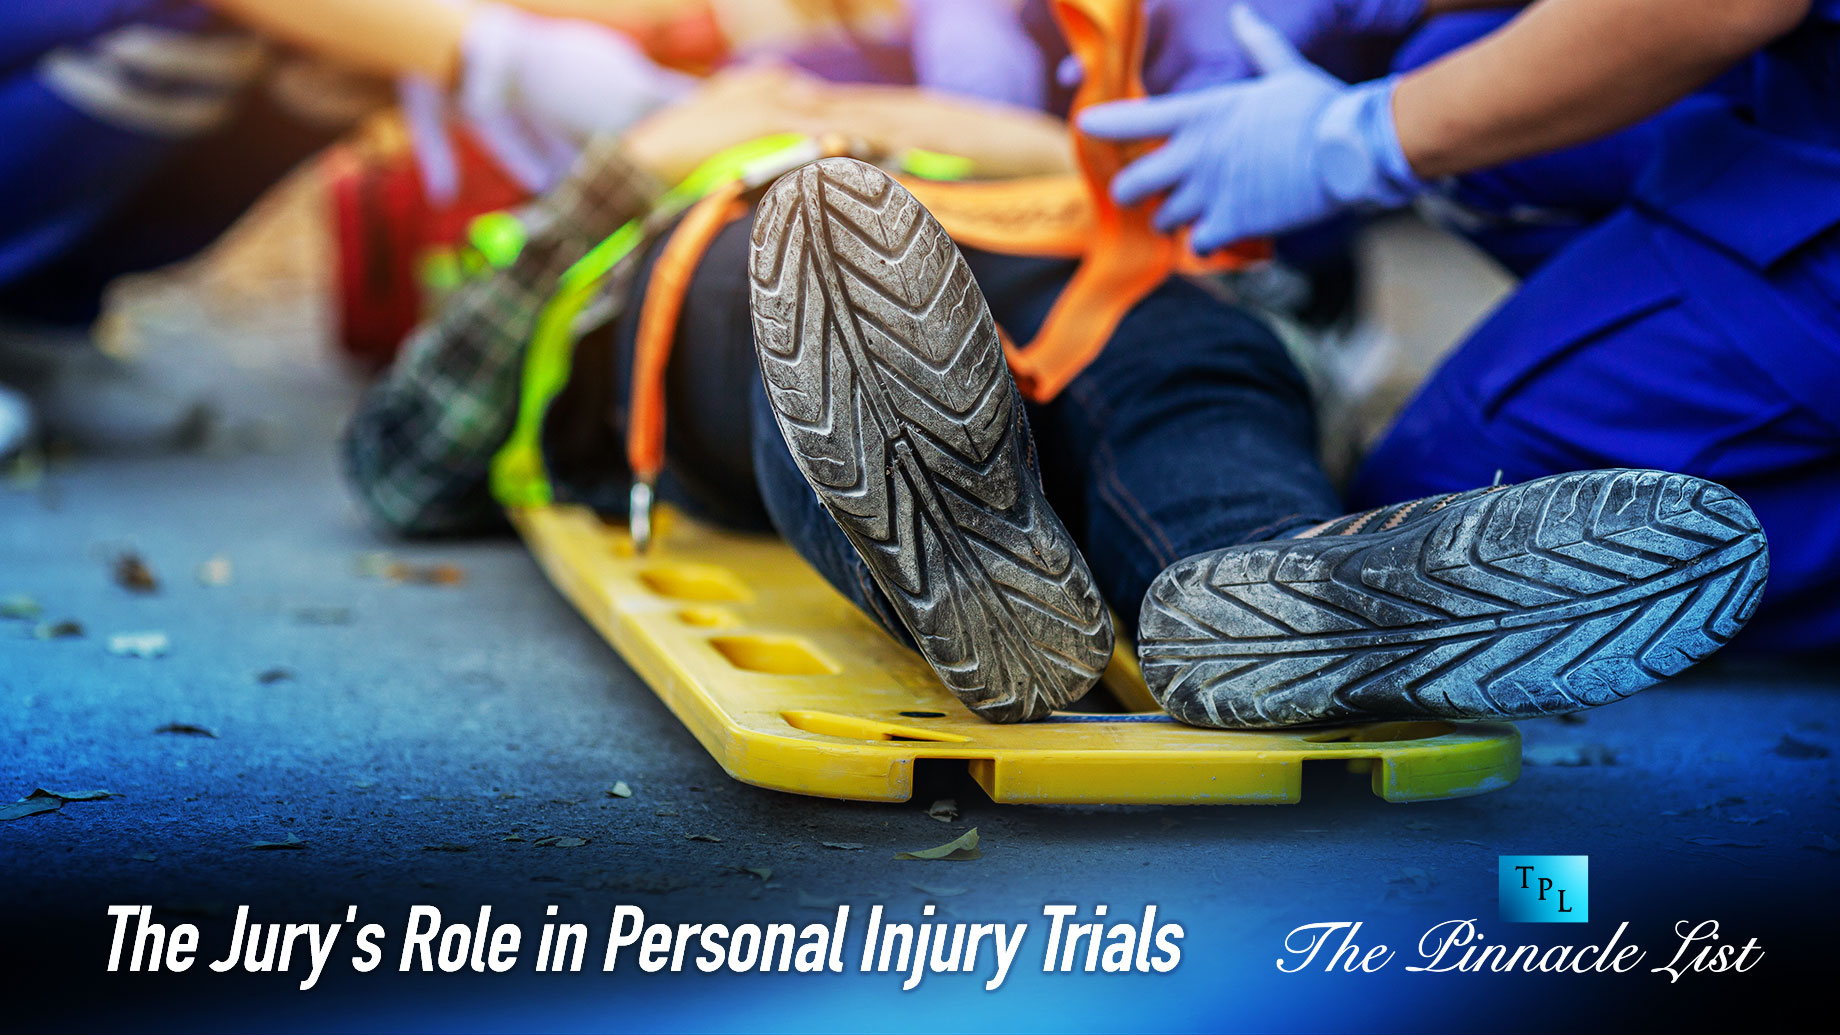 The Jury's Role in Personal Injury Trials